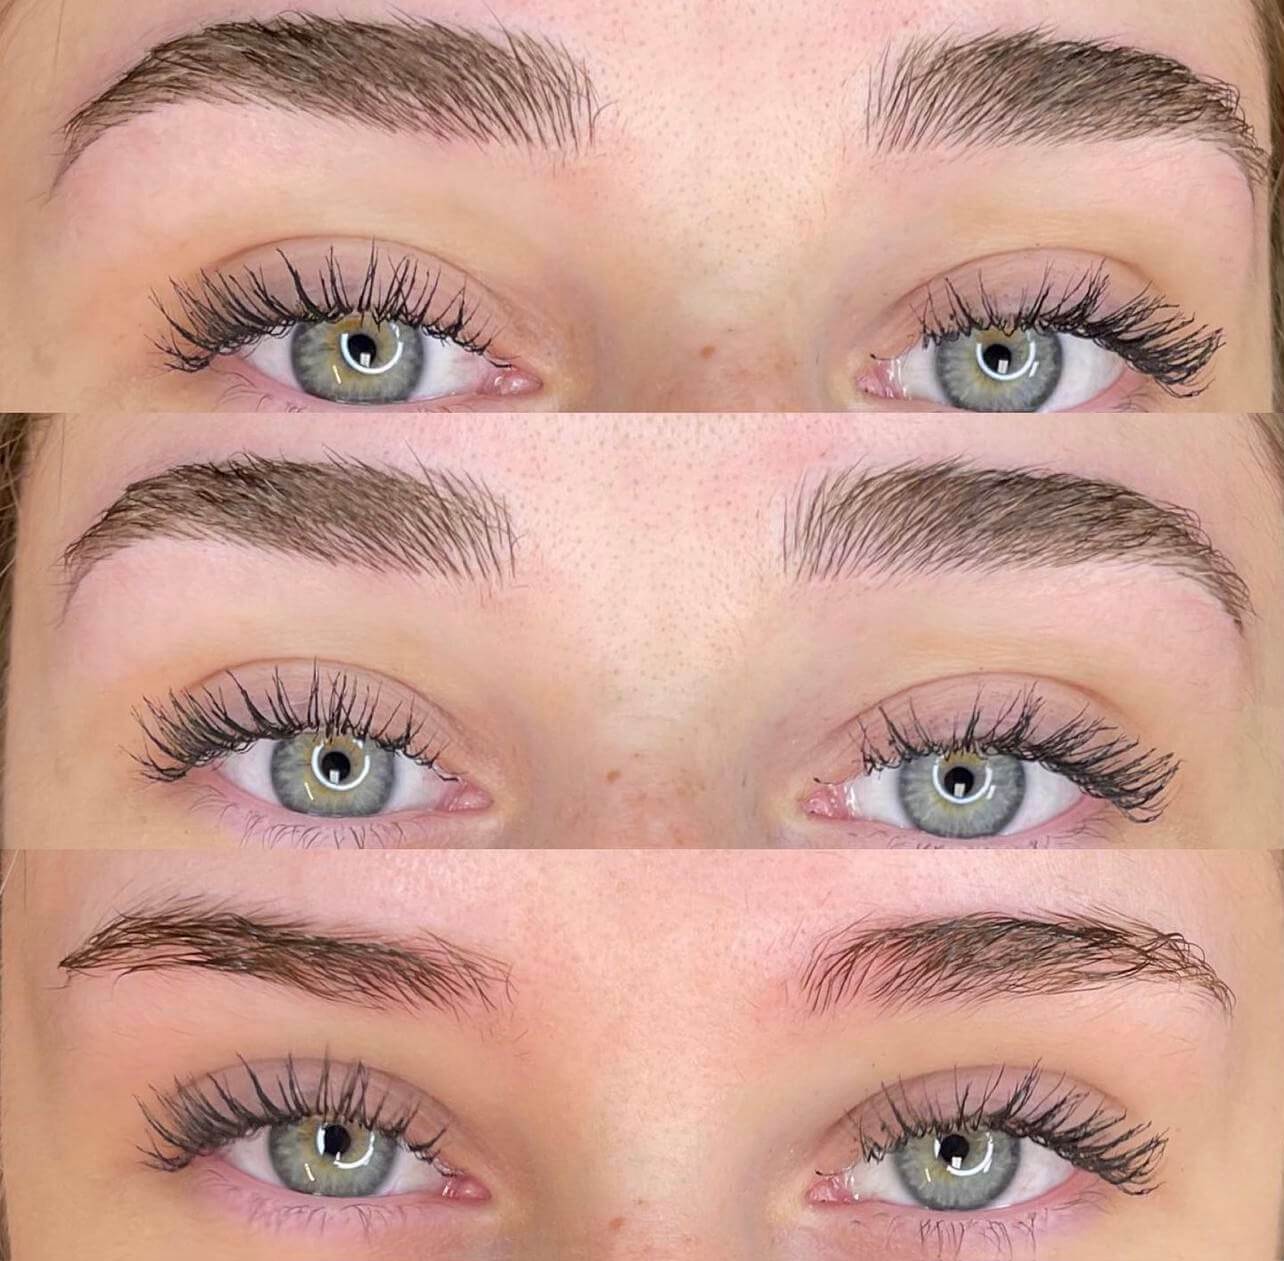 up close shots of eyes and eyebrows before and after microblading